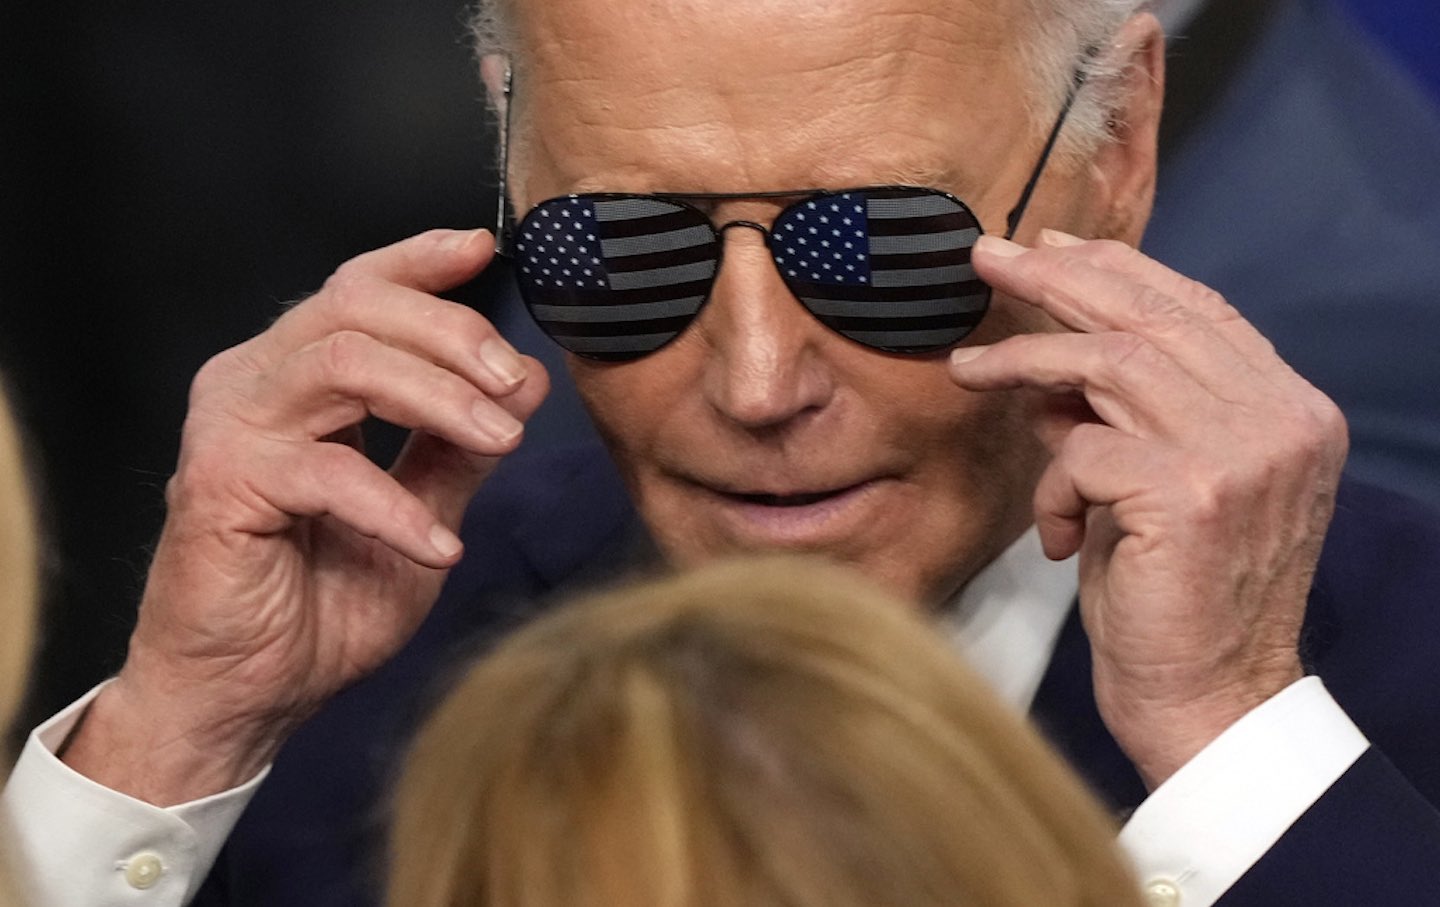 Joe Biden tries on a pair of sunglasses on in Nashua, New Hampshire.